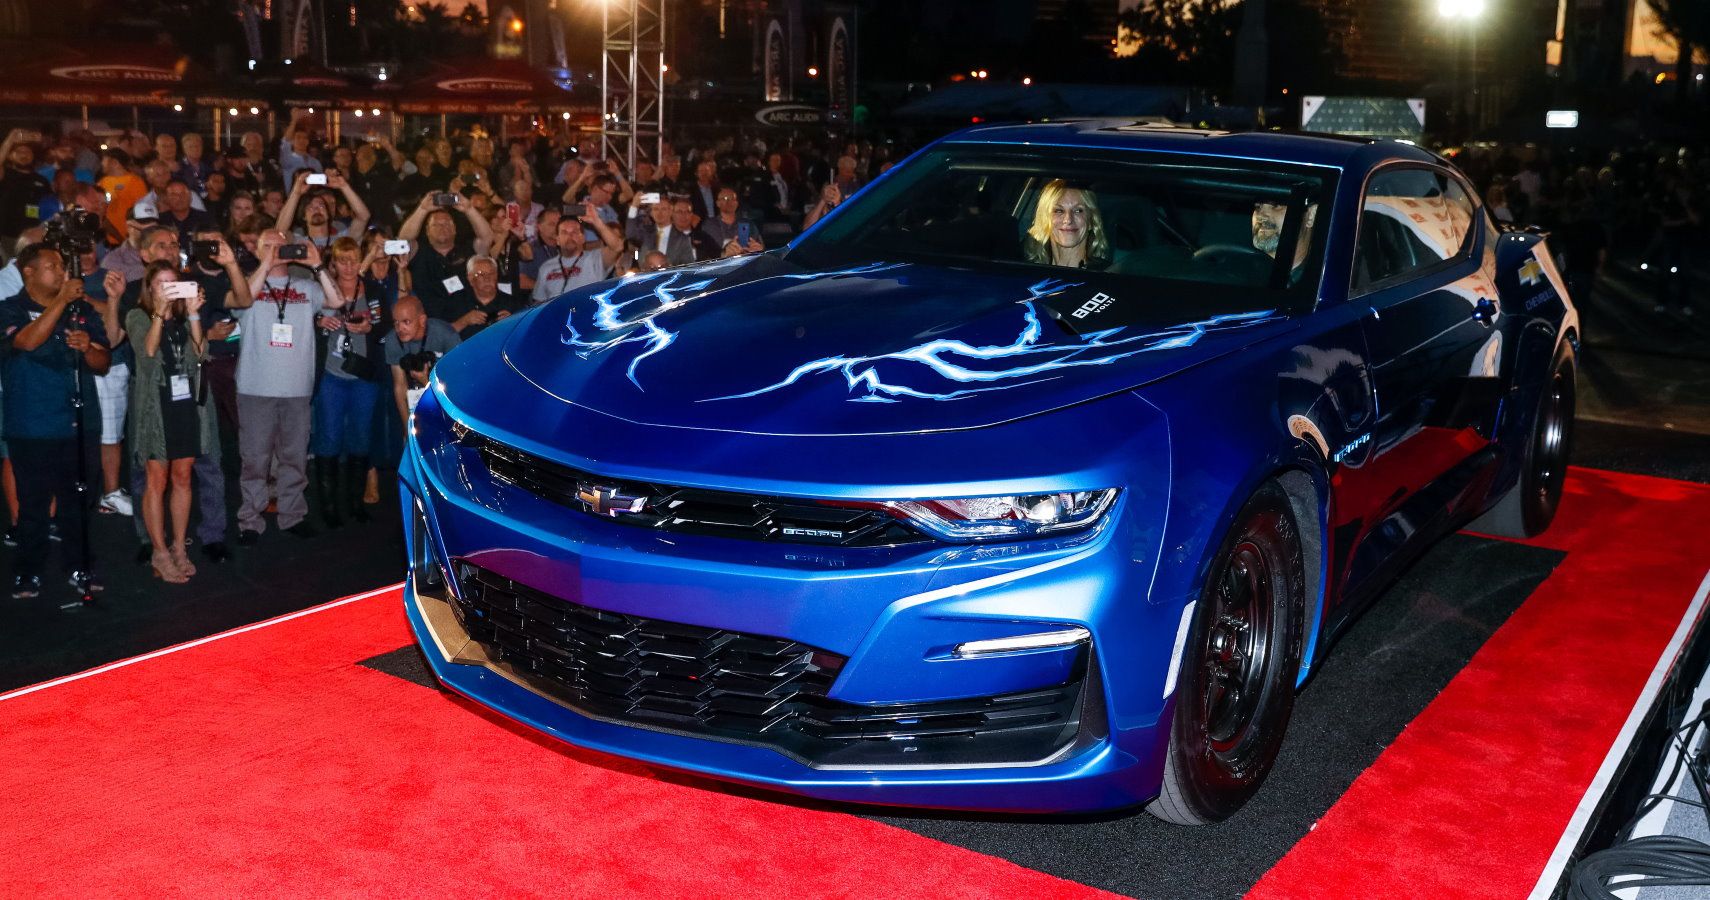 Chevrolet introduces the eCOPO Camaro Concept - an electrified vision for drag racing - Monday, October 29, 2018 at the SEMA Show in Las Vegas, Nevada. Developed by General Motors and built in partnership with the pioneering electric drag racing team Hancock and Lane Racing, the concept race car ??? based on the 2019 COPO Camaro ??? is entirely electric powered, driven by an electric motor providing the equivalent of more than 700 horsepower and 600 lb-ft of torque. Chevrolet estimates quarter-m